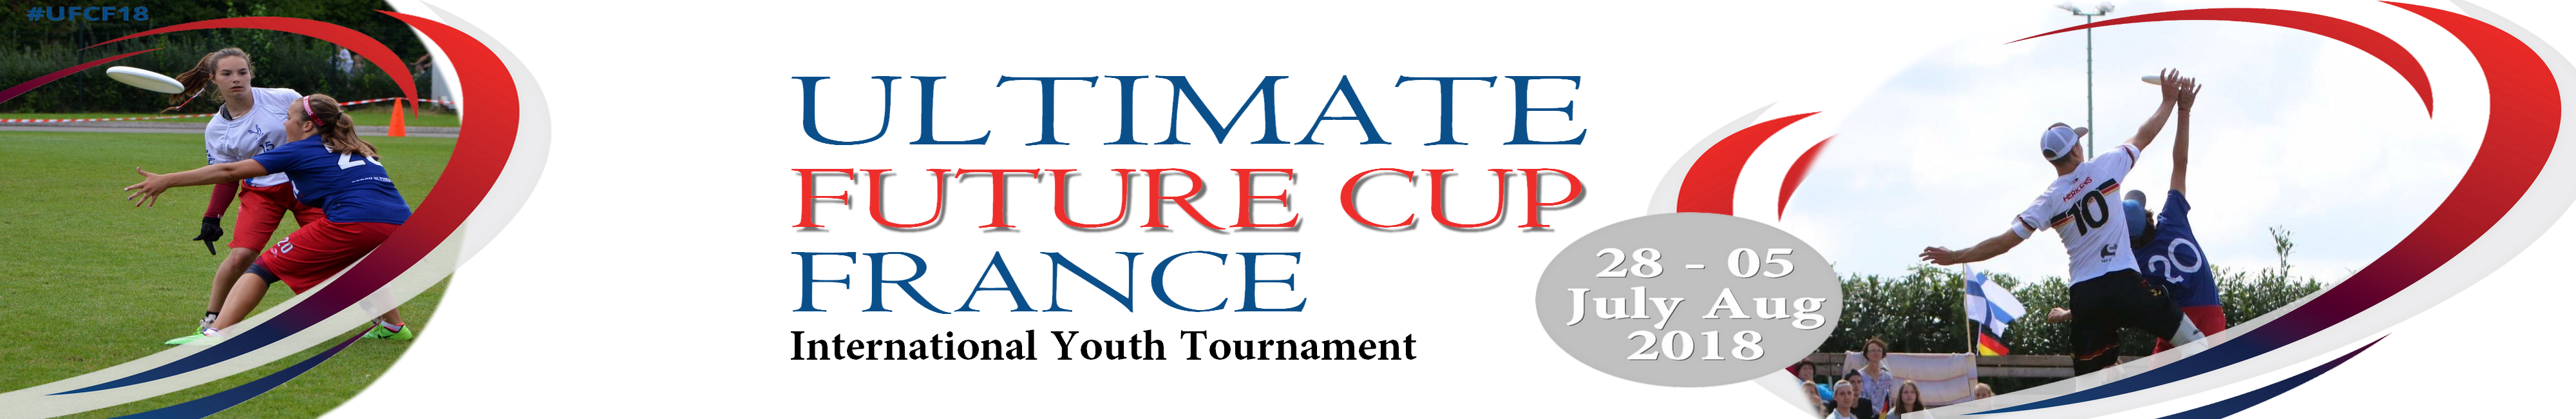 Ultimate Future Cup France 2018